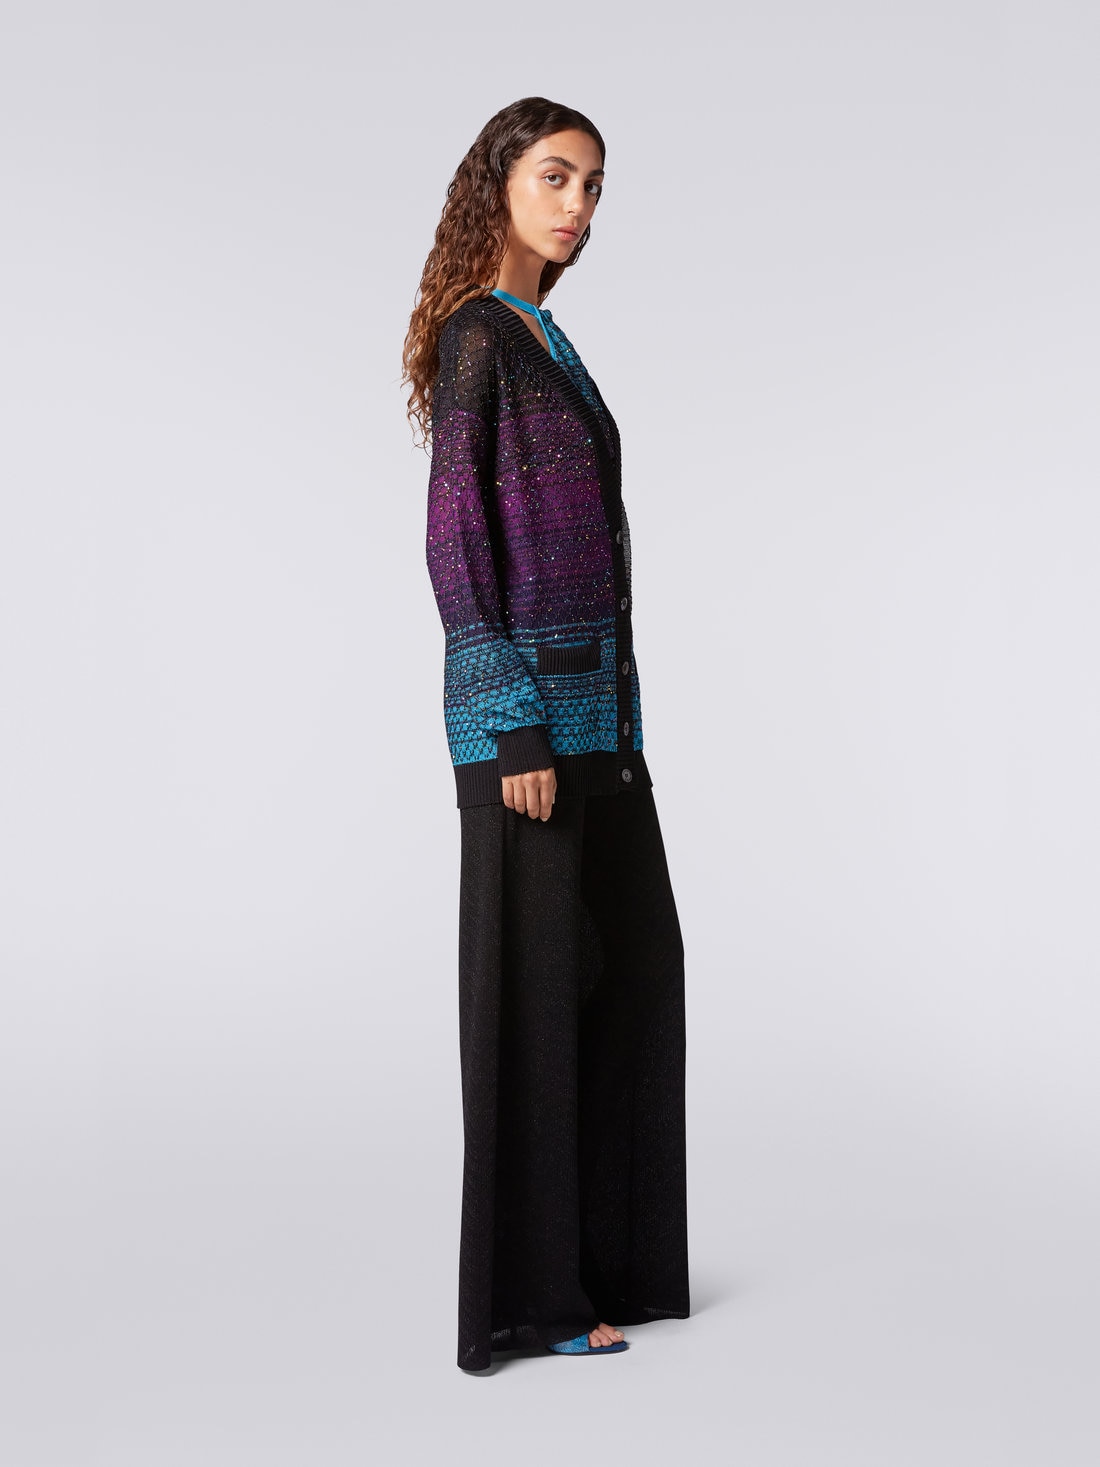 Oversized loose-knit cardigan with sequins, Turquoise, Purple & Black - 2